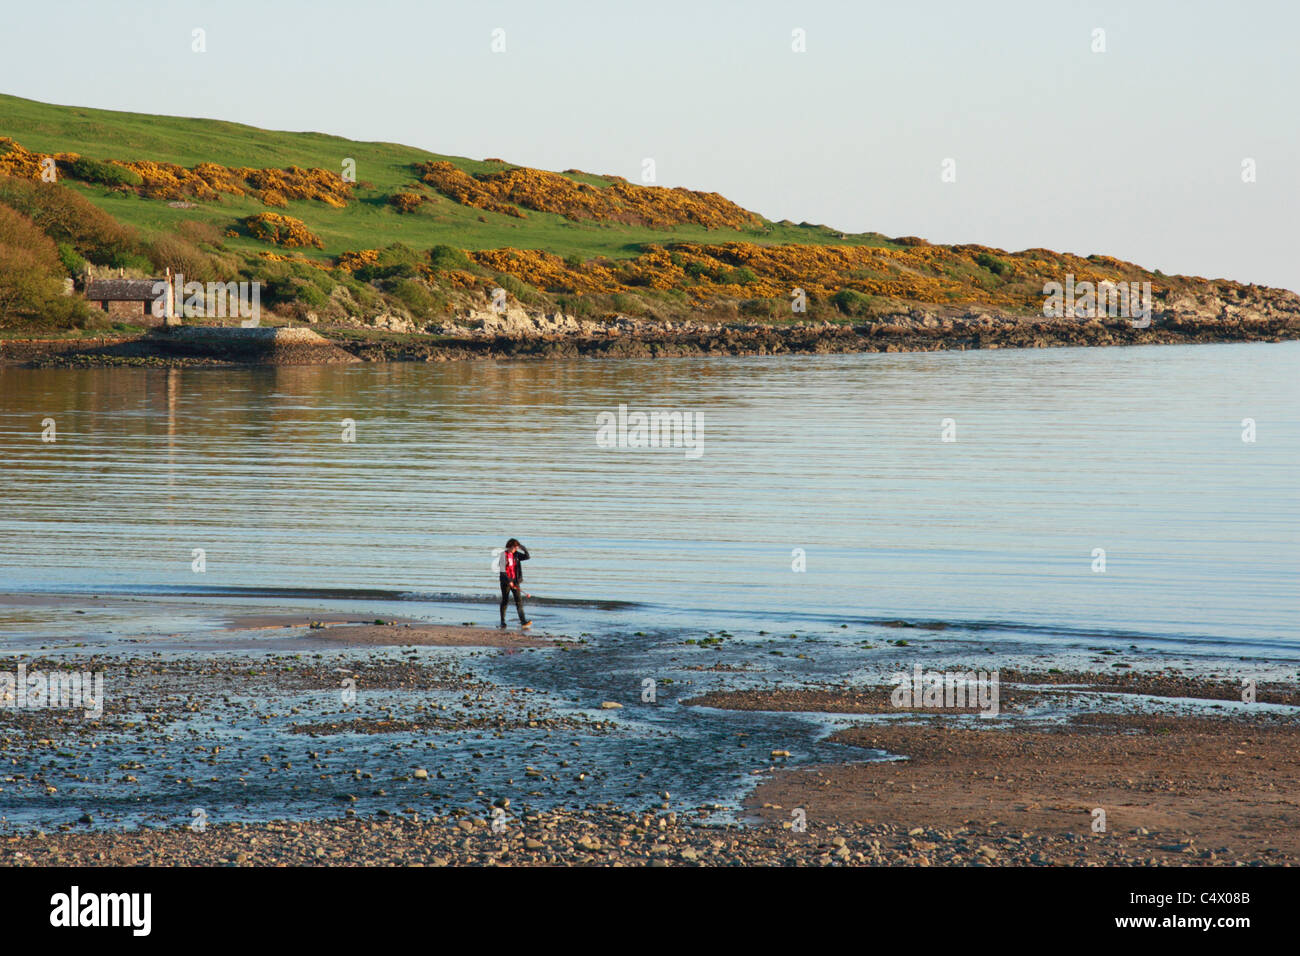 Person walking on beach at Brighouse Bay near Kirkcudbright, Dumfries and Galloway, South West Scotland, UK Stock Photo